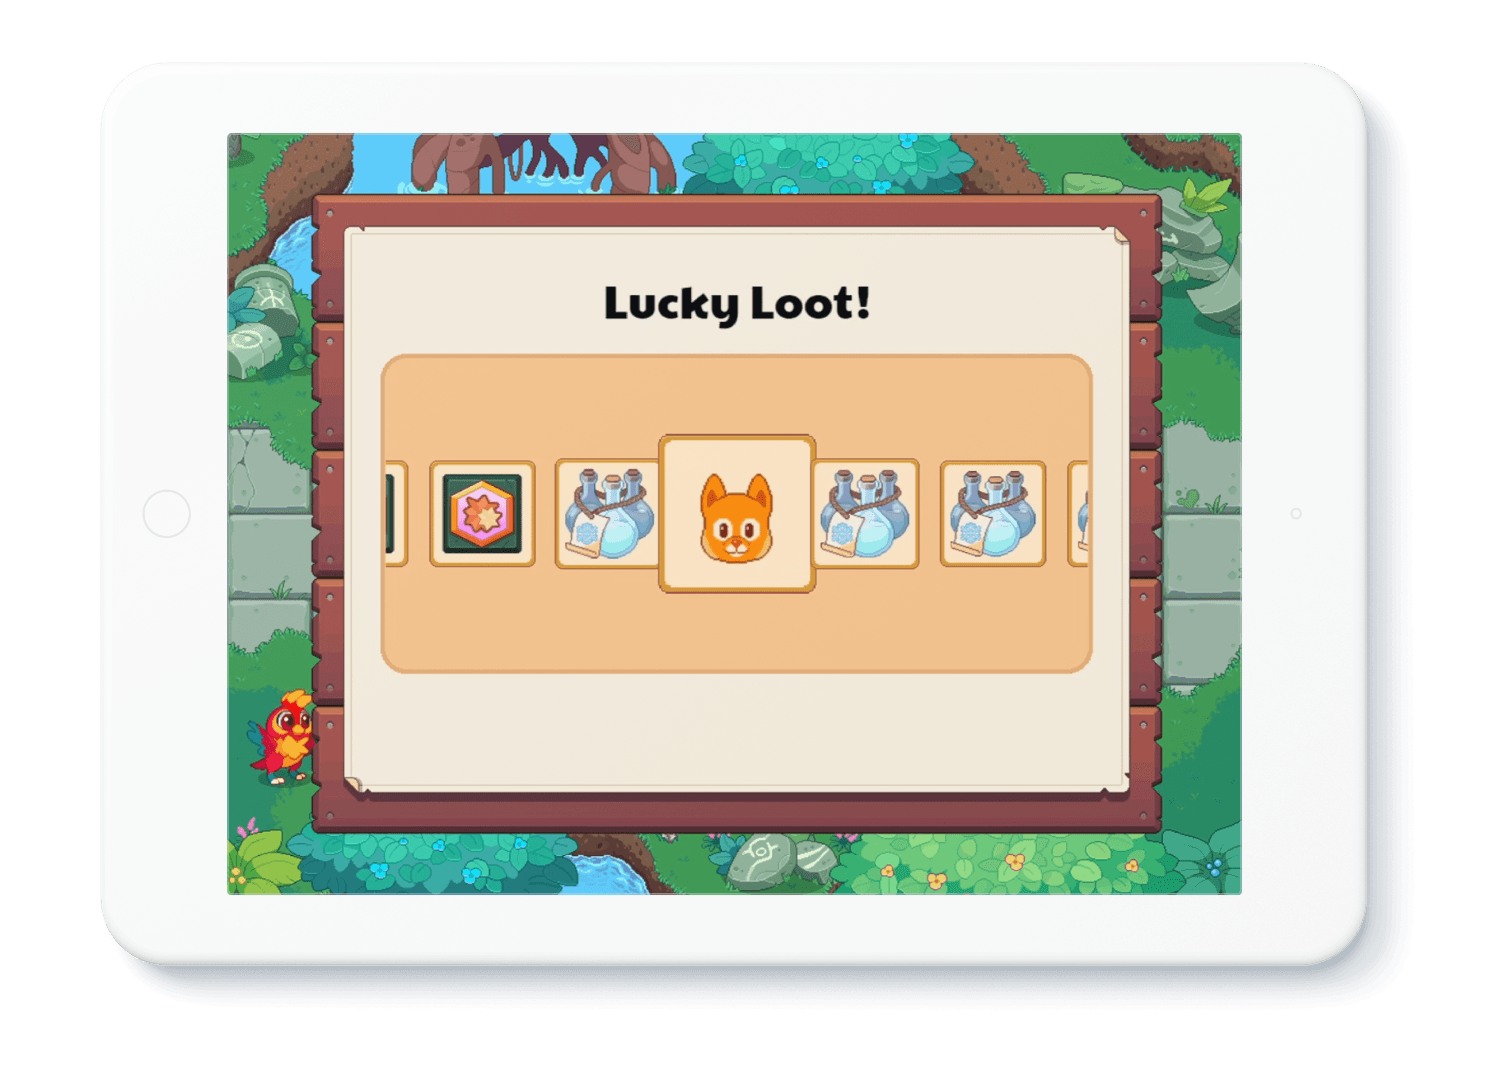 Illustration of tablet device with in-game loot on-screen. Text on screen says "Lucky Loot!"